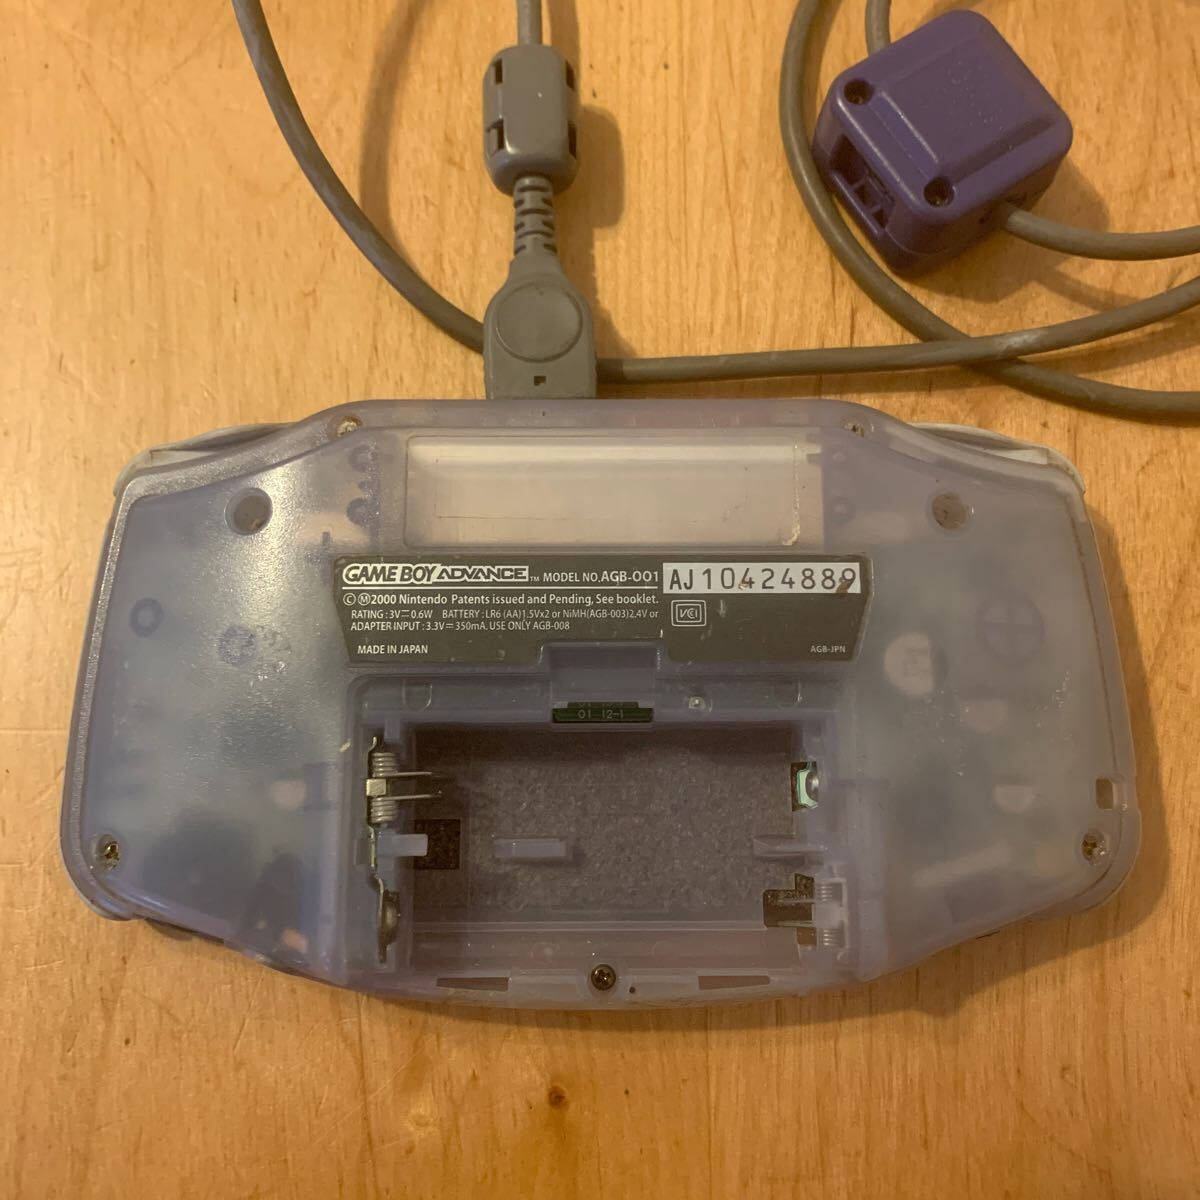 [ operation not yet verification ]Nintendo GAMEBOY ADVANCE Game Boy Advance GBA body AJ10424889 + exclusive use communication cable attaching 